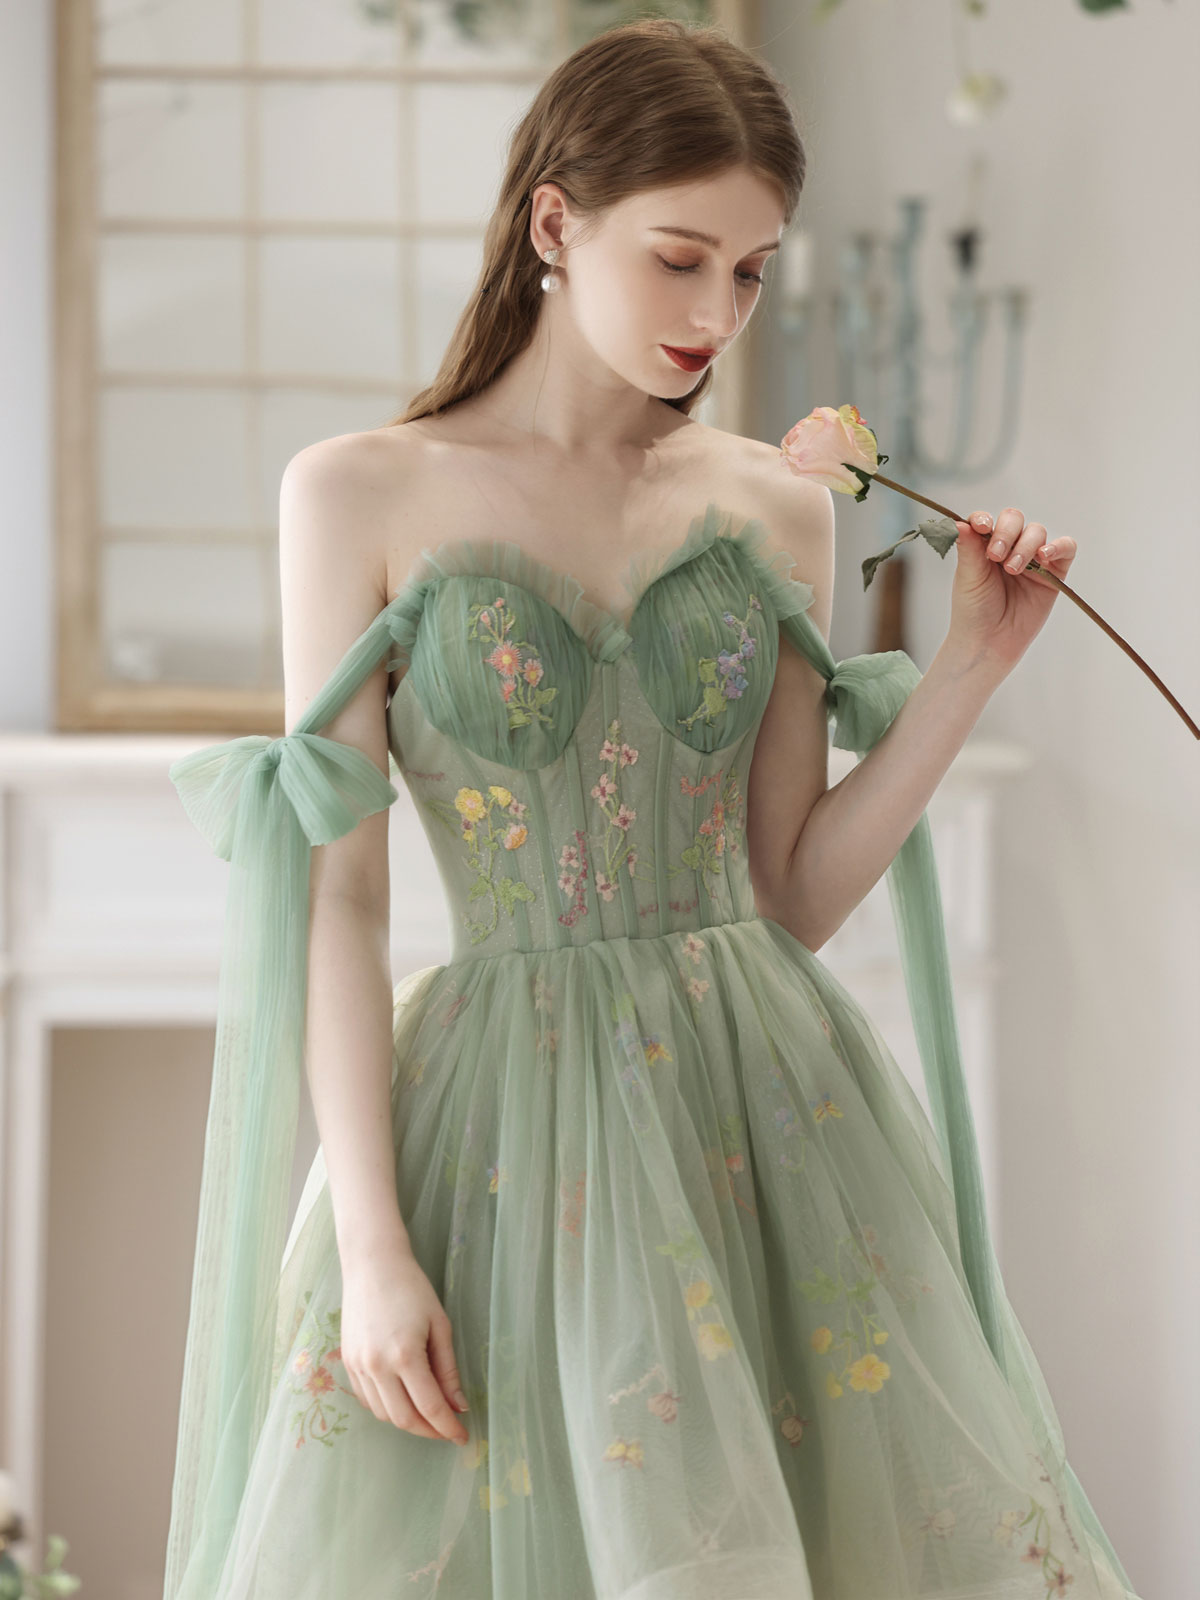 Green High Low Boho See Through Homecoming Dress - DollyGown